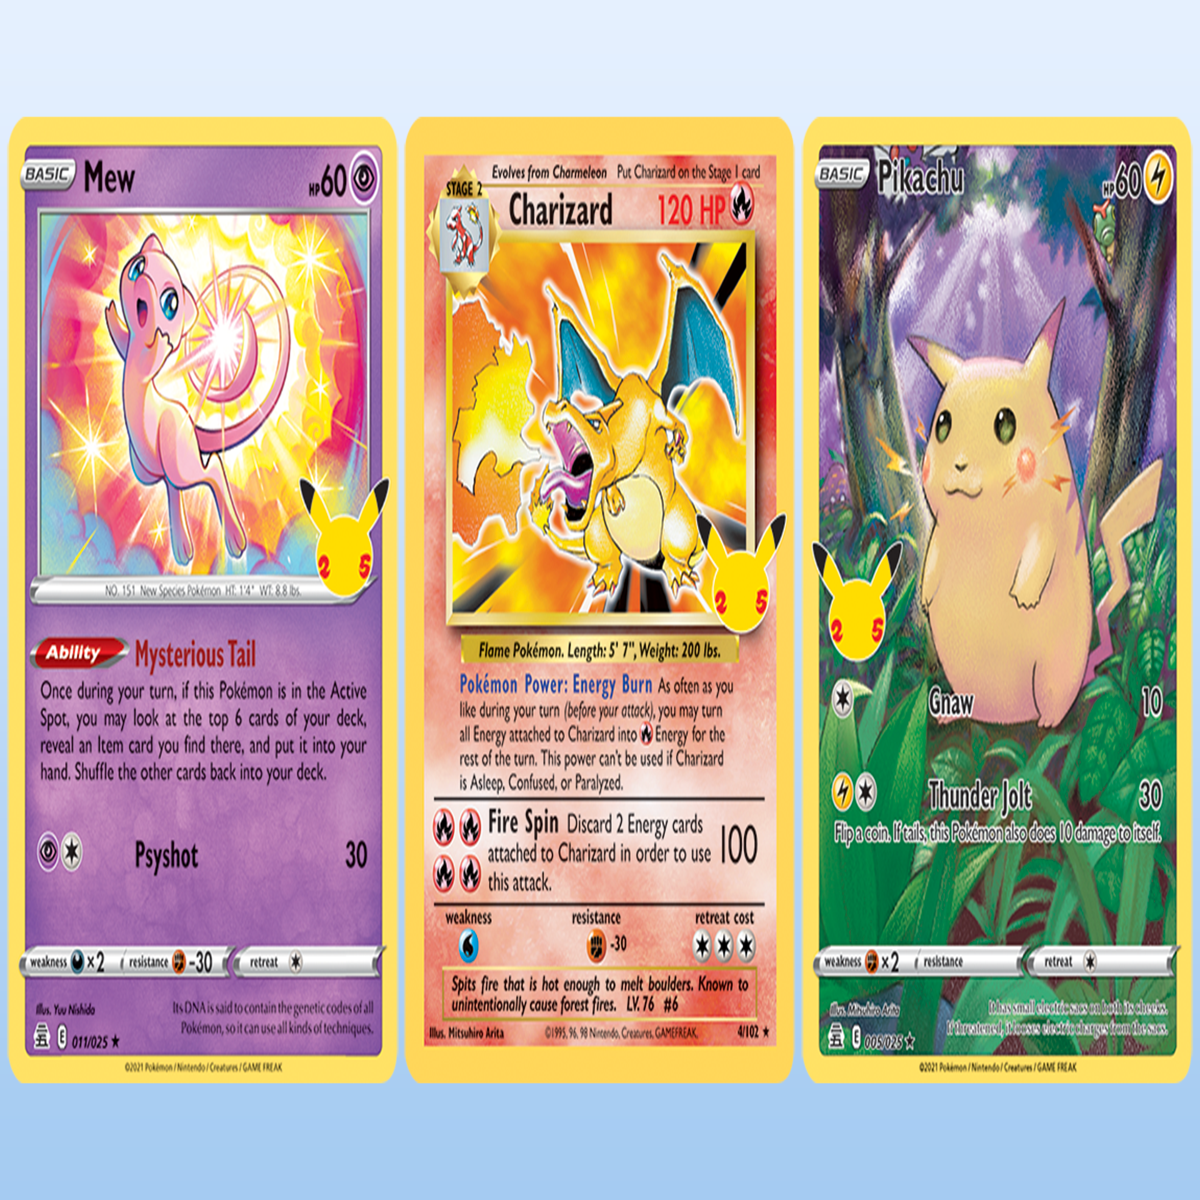 https://assetsio.gnwcdn.com/pokemon-tcg-celebrations-cards-mew-charizard-pikachu.png?width=1200&height=1200&fit=crop&quality=100&format=png&enable=upscale&auto=webp